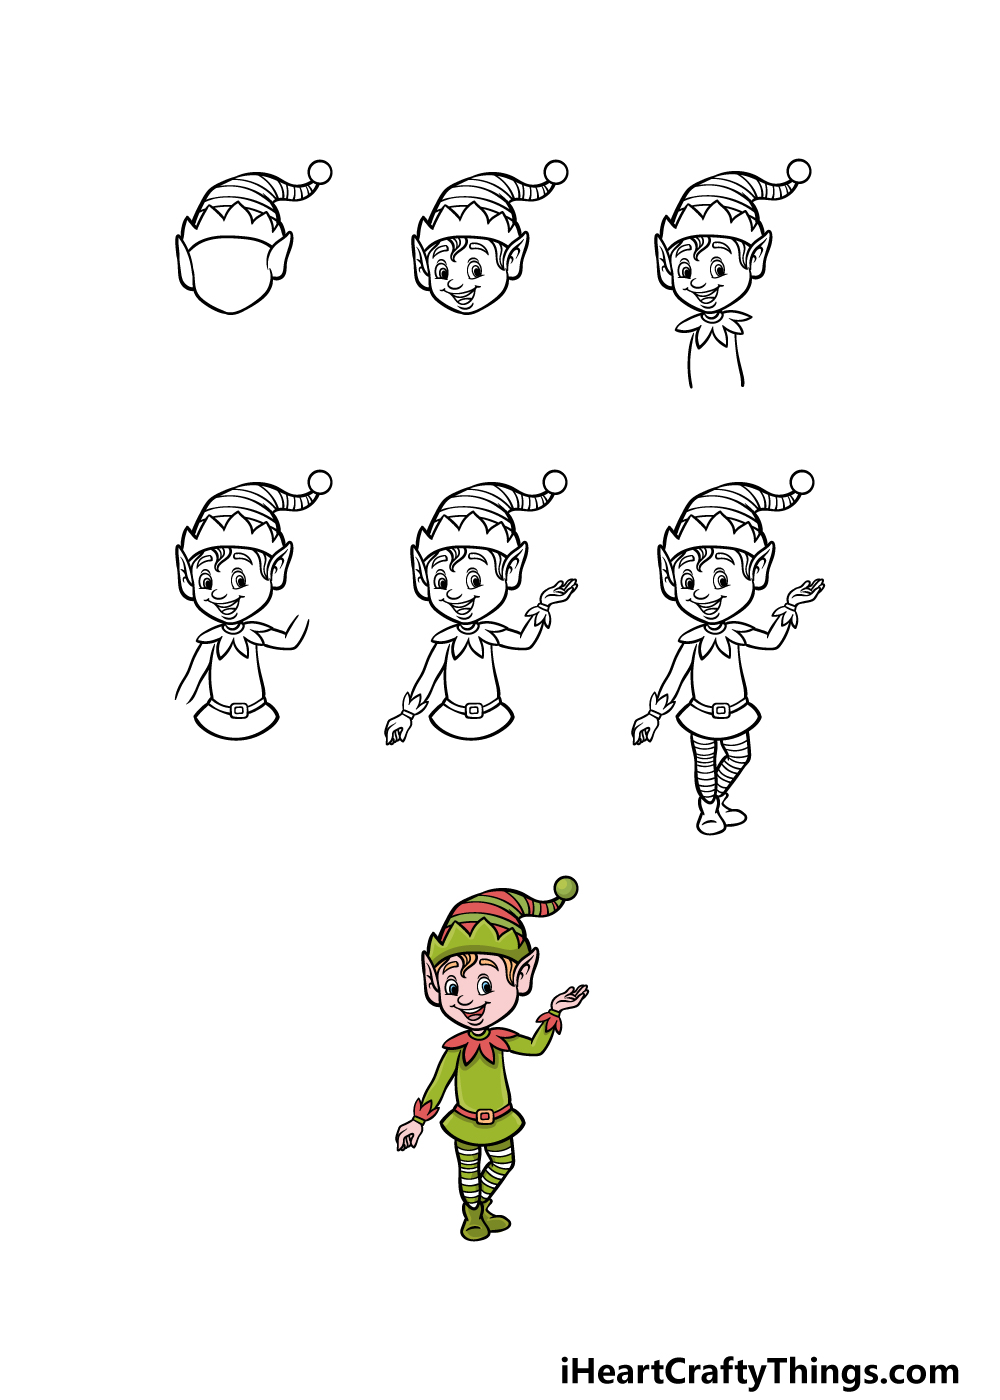 how to draw a cartoon elf in 7 steps